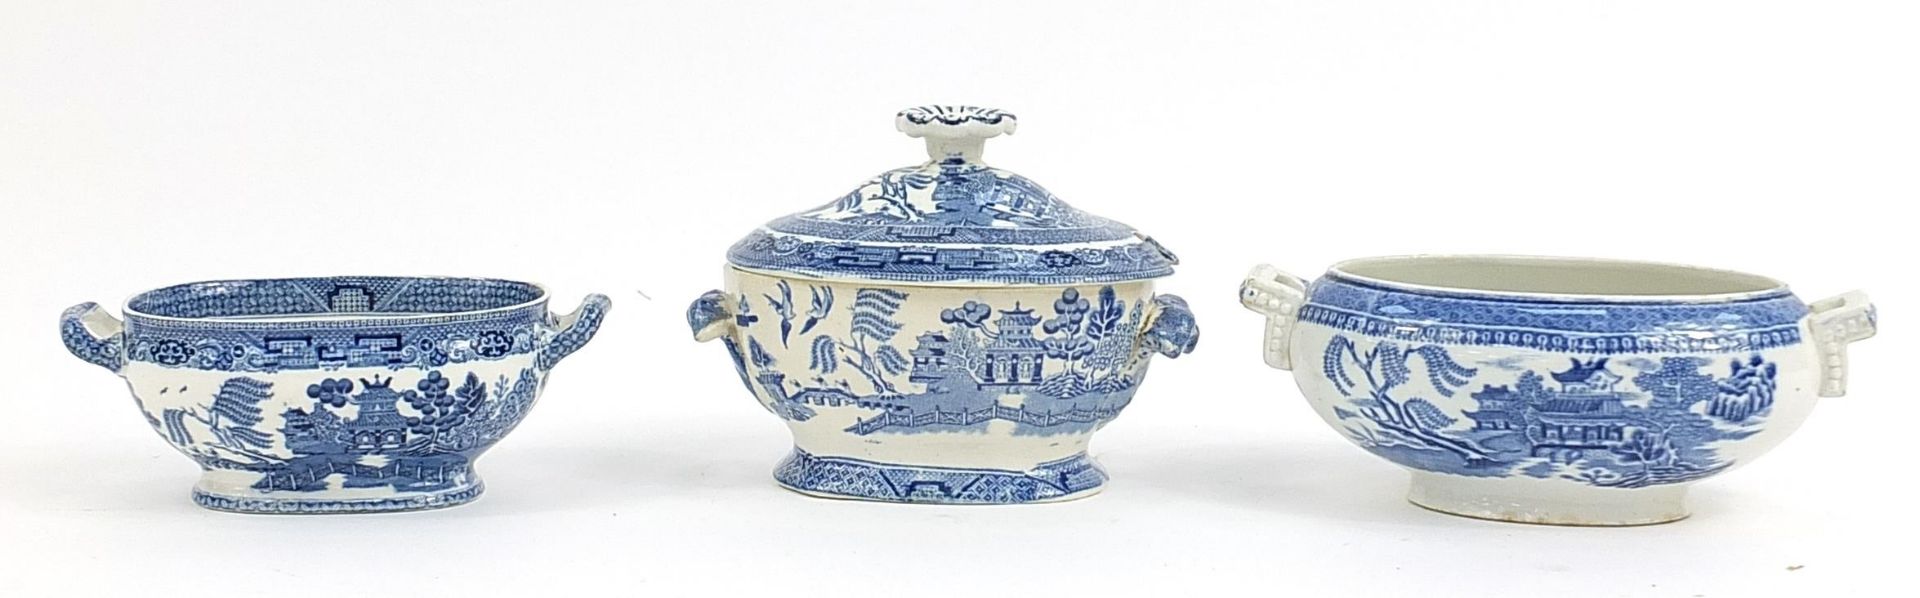 Old blue and white Willow pattern tureens, covers and stands, the largest 20cm wide - Image 2 of 4